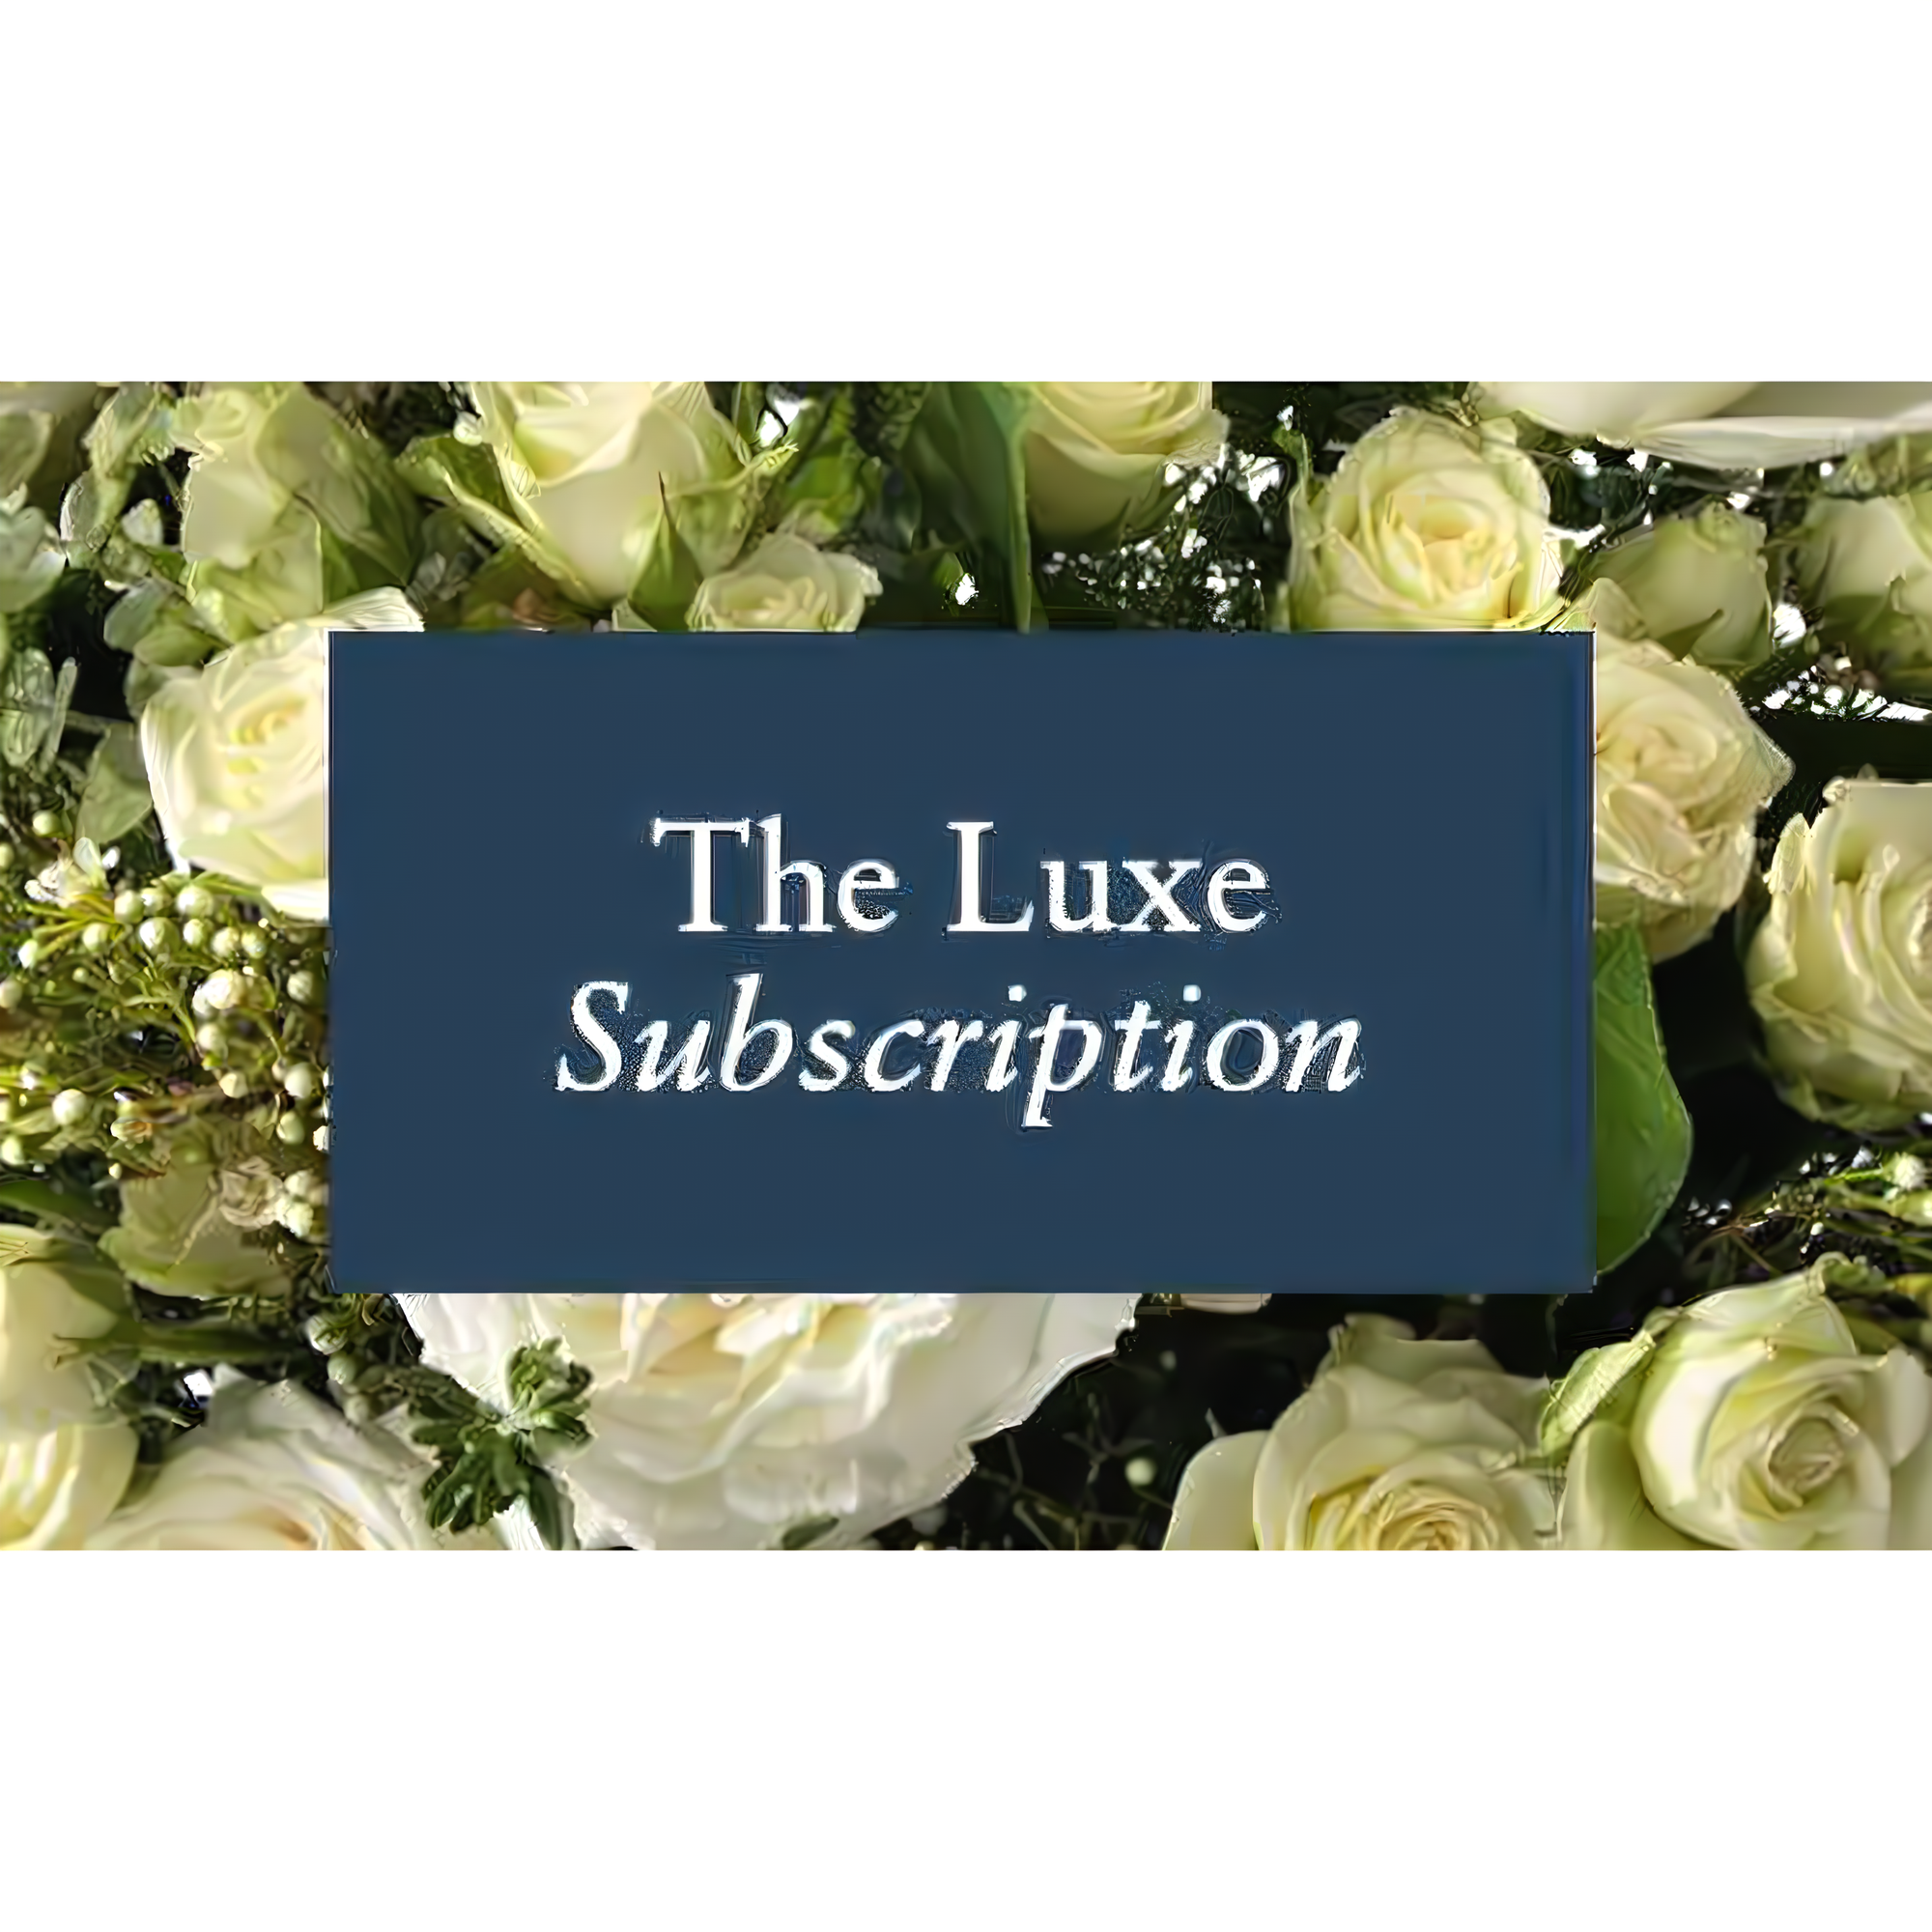 The Luxe Subscription - Fresh Cut Flowers